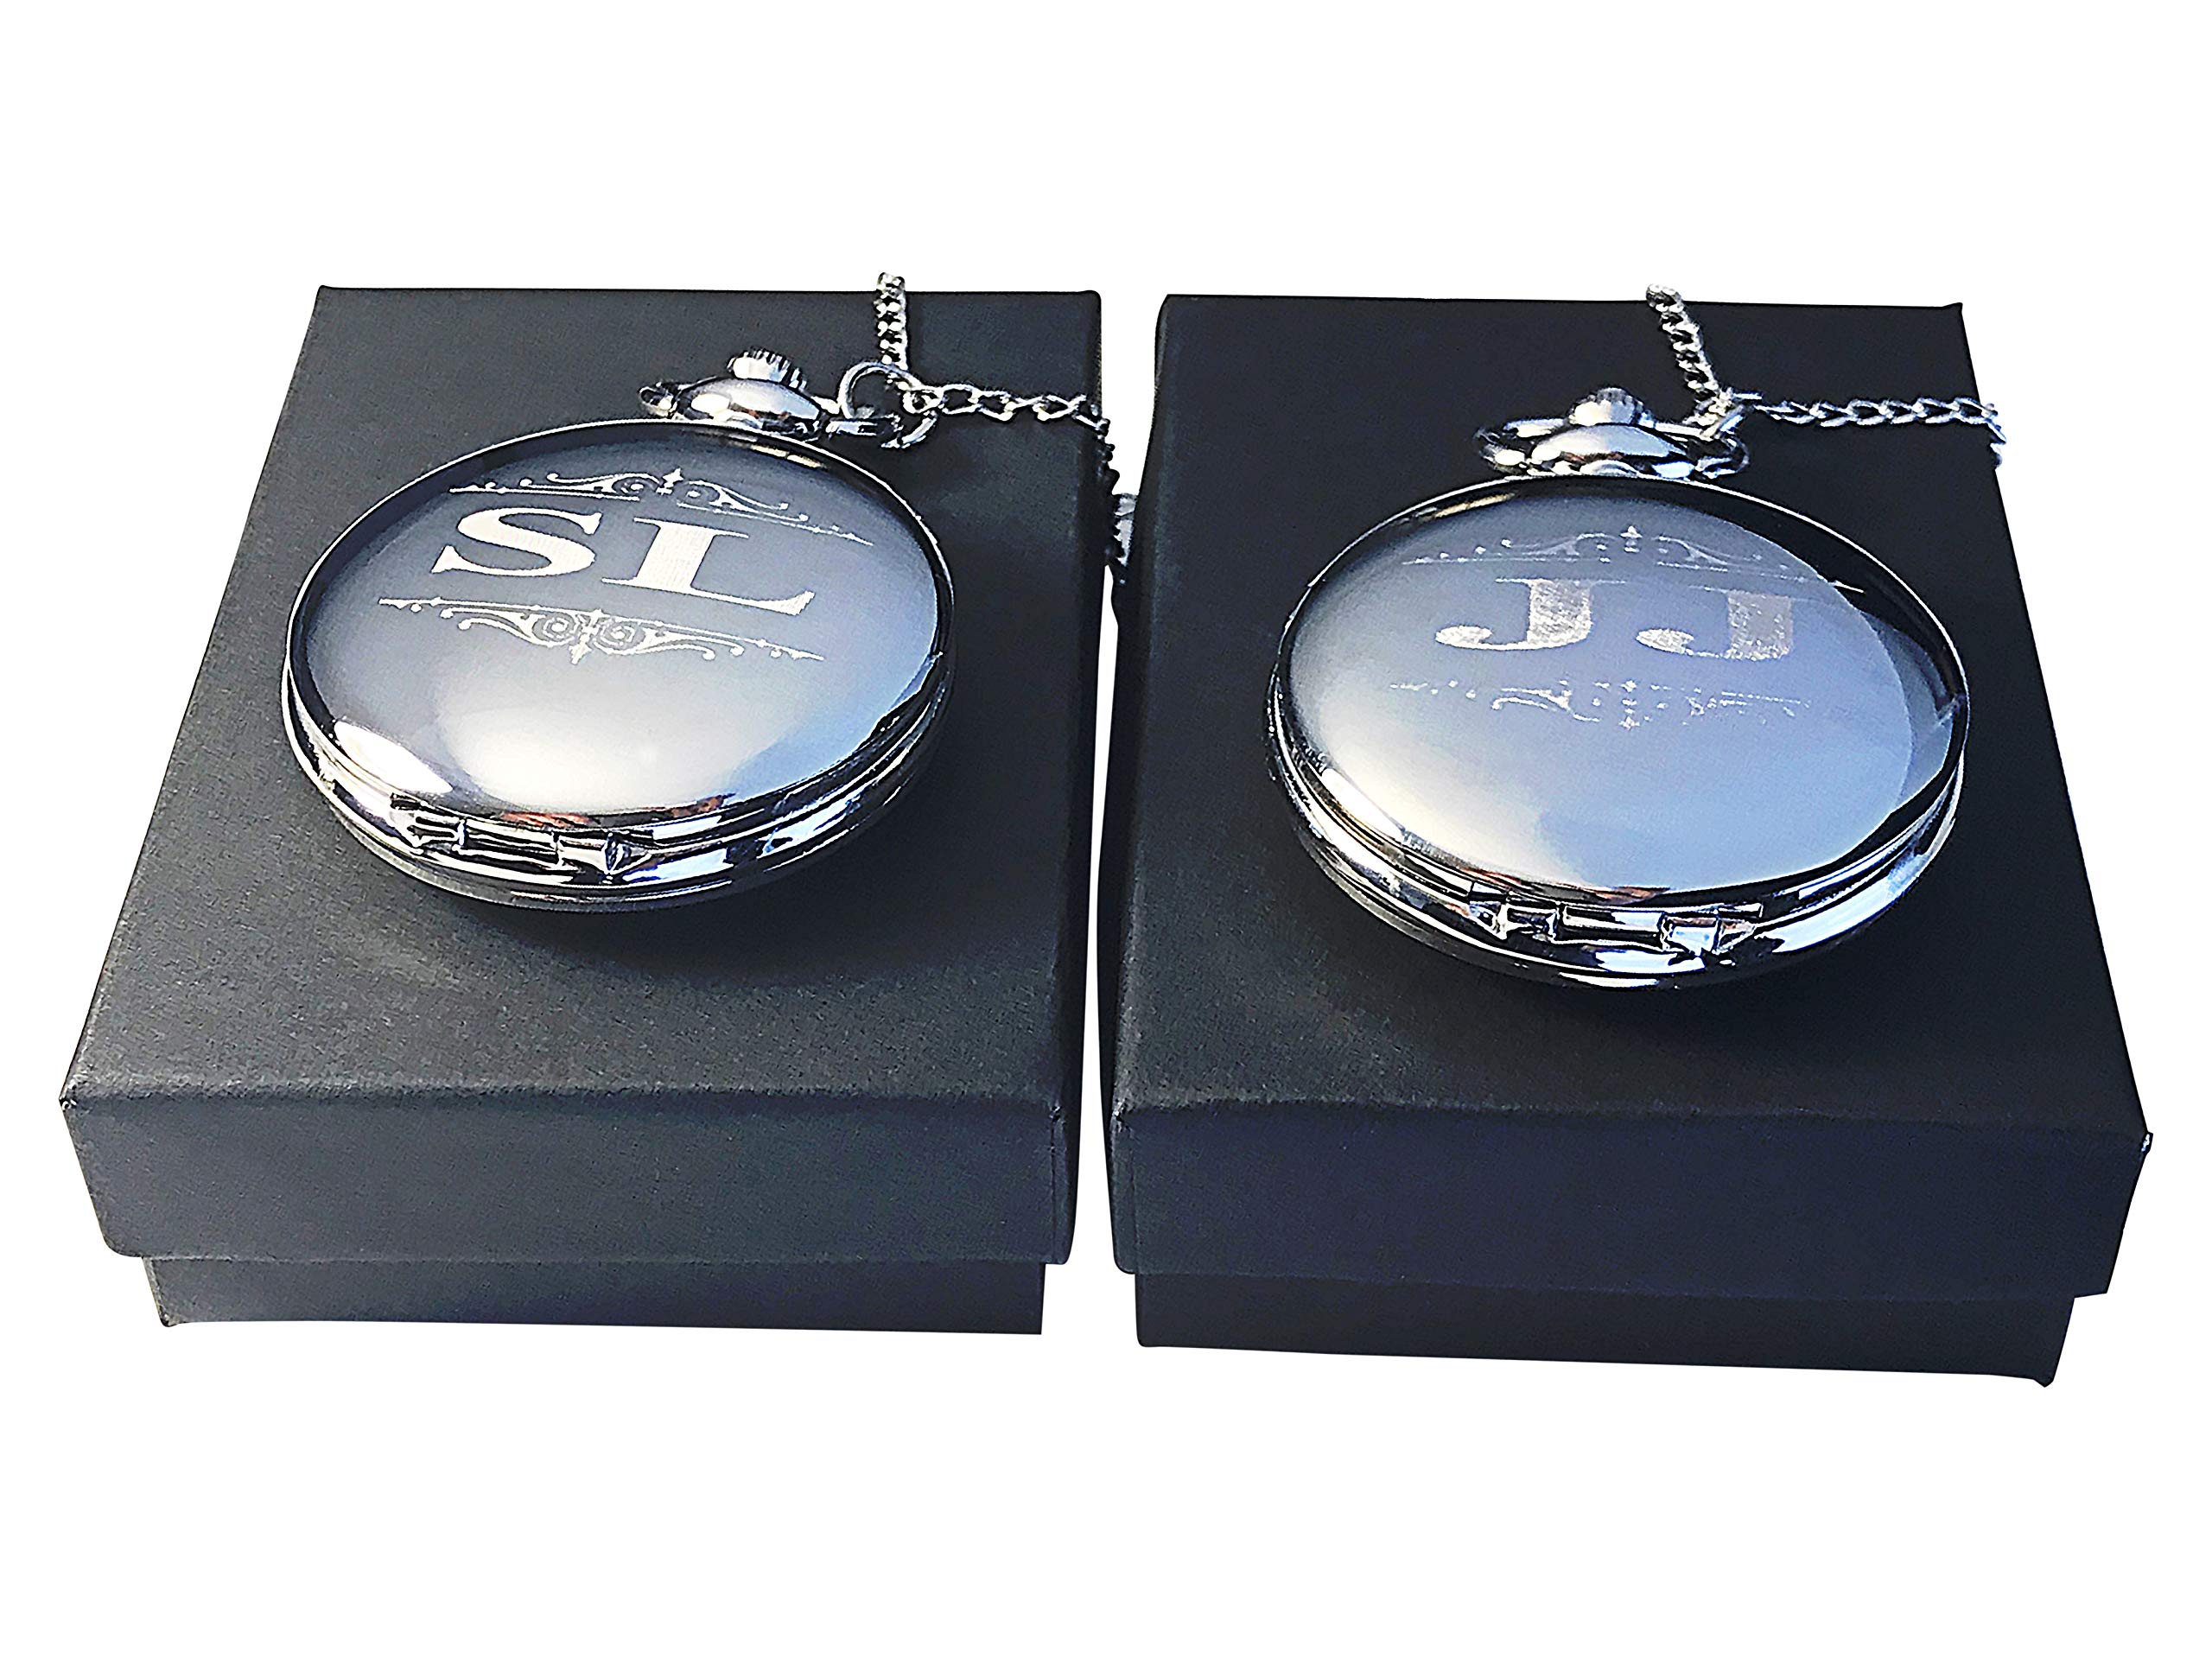 Engraved Pocket Watch - Wedding Groomsmen Personalized Unique Gifts - Chain, Box and Engraving Included, Comes in 4 Colors